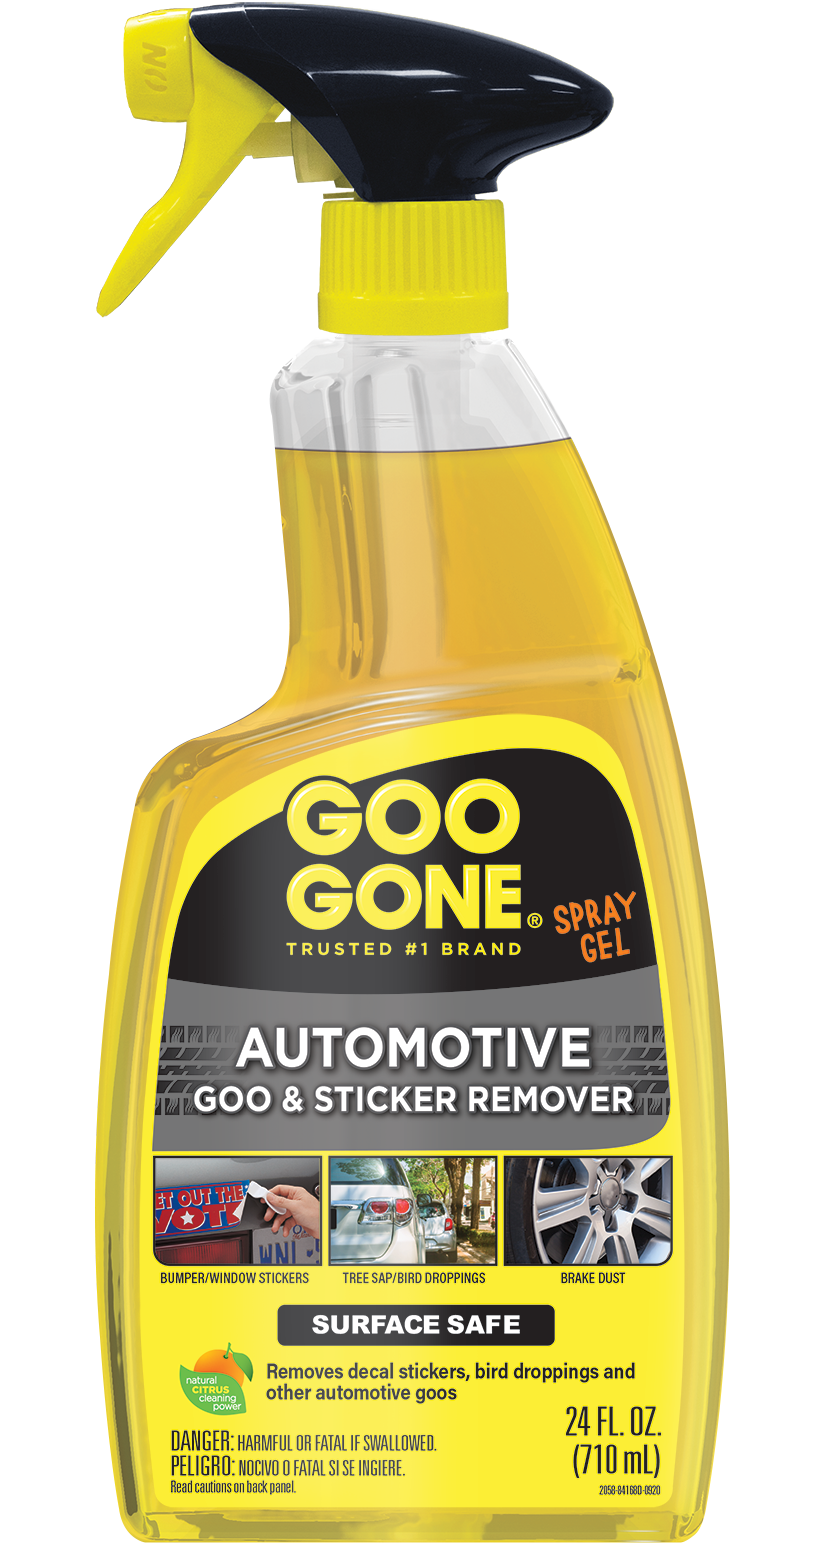 Goo Gone Automotive Goo & Sticker Remover Spray Gel for Cleaning